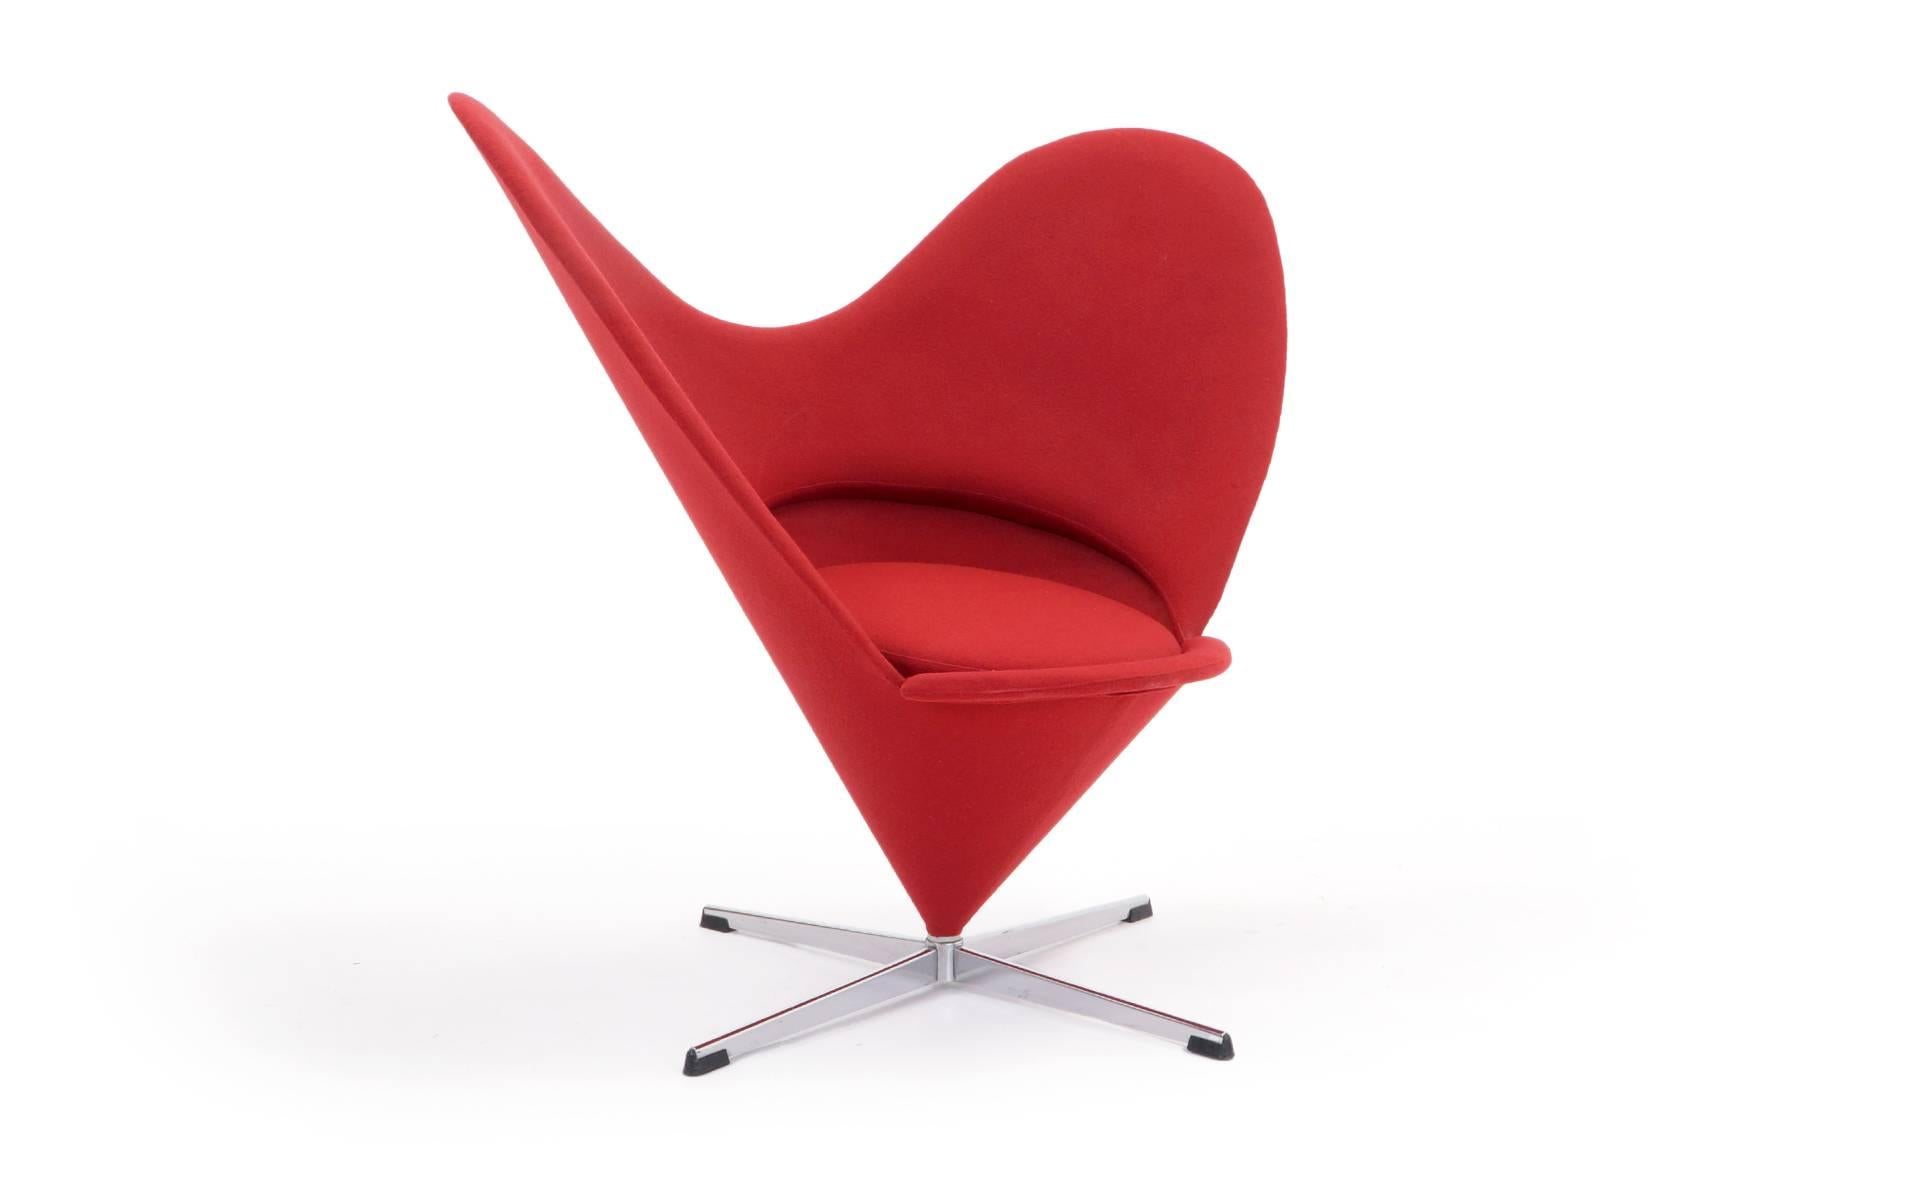 One would be hard pressed to find a finer original example of this design. This Verner Panton heart chair, in classic red, is in excellent vintage condition. Not a Vitra reissue, but the original Plus-Linje. And there is a difference. We have had